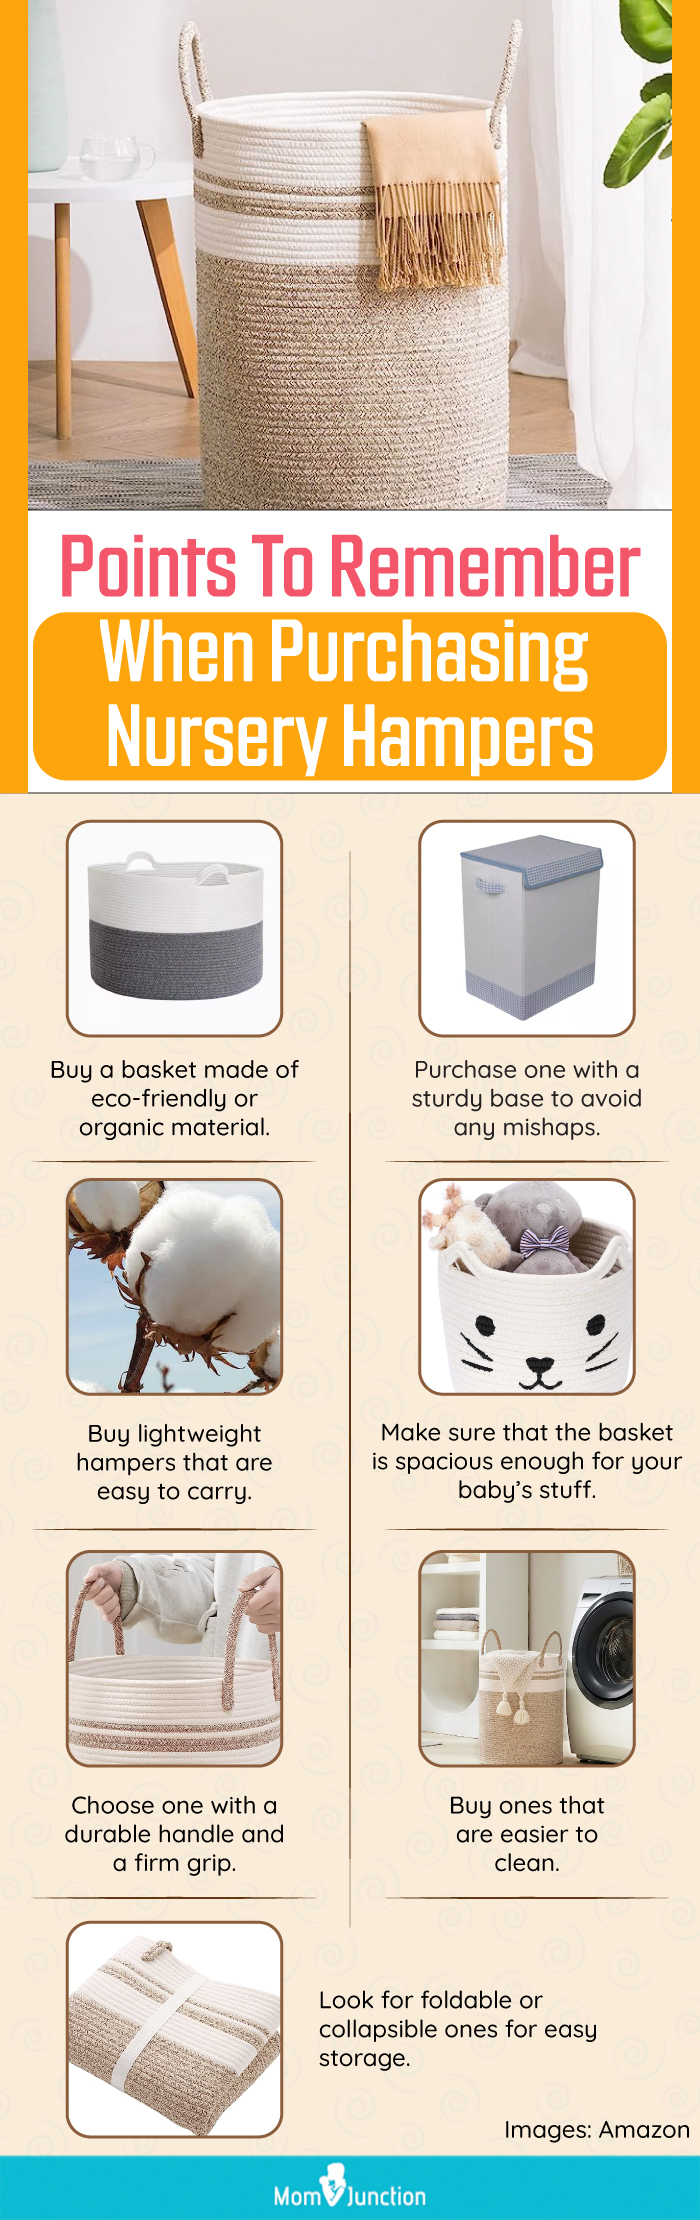 Points To Remember When Purchasing Nursery Hampers (infographic)